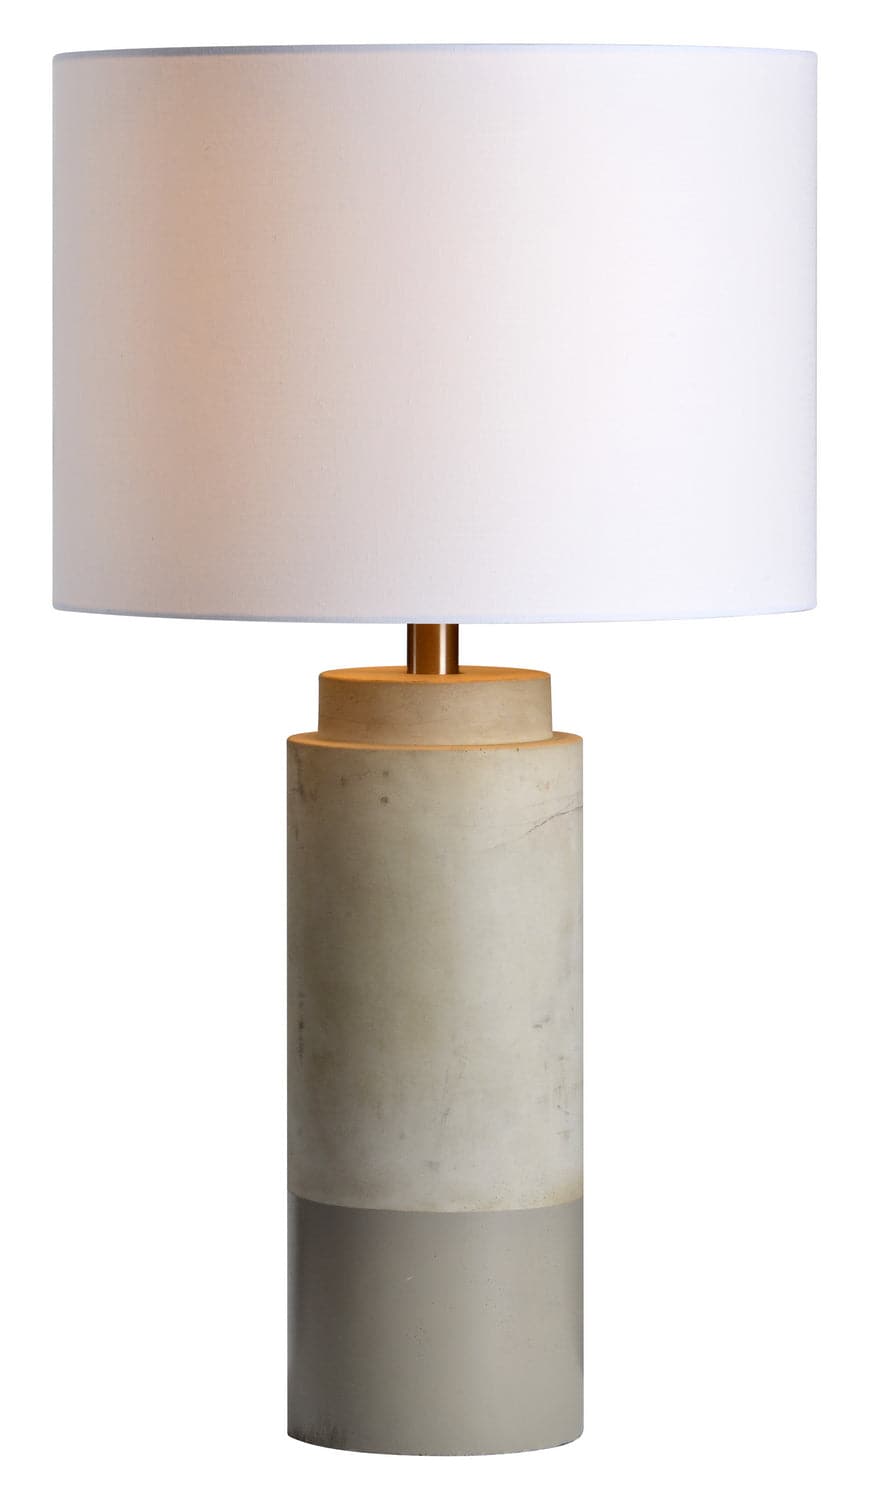 Renwil - LPT604 - One Light Table Lamp - Lagertha - Sand Brown